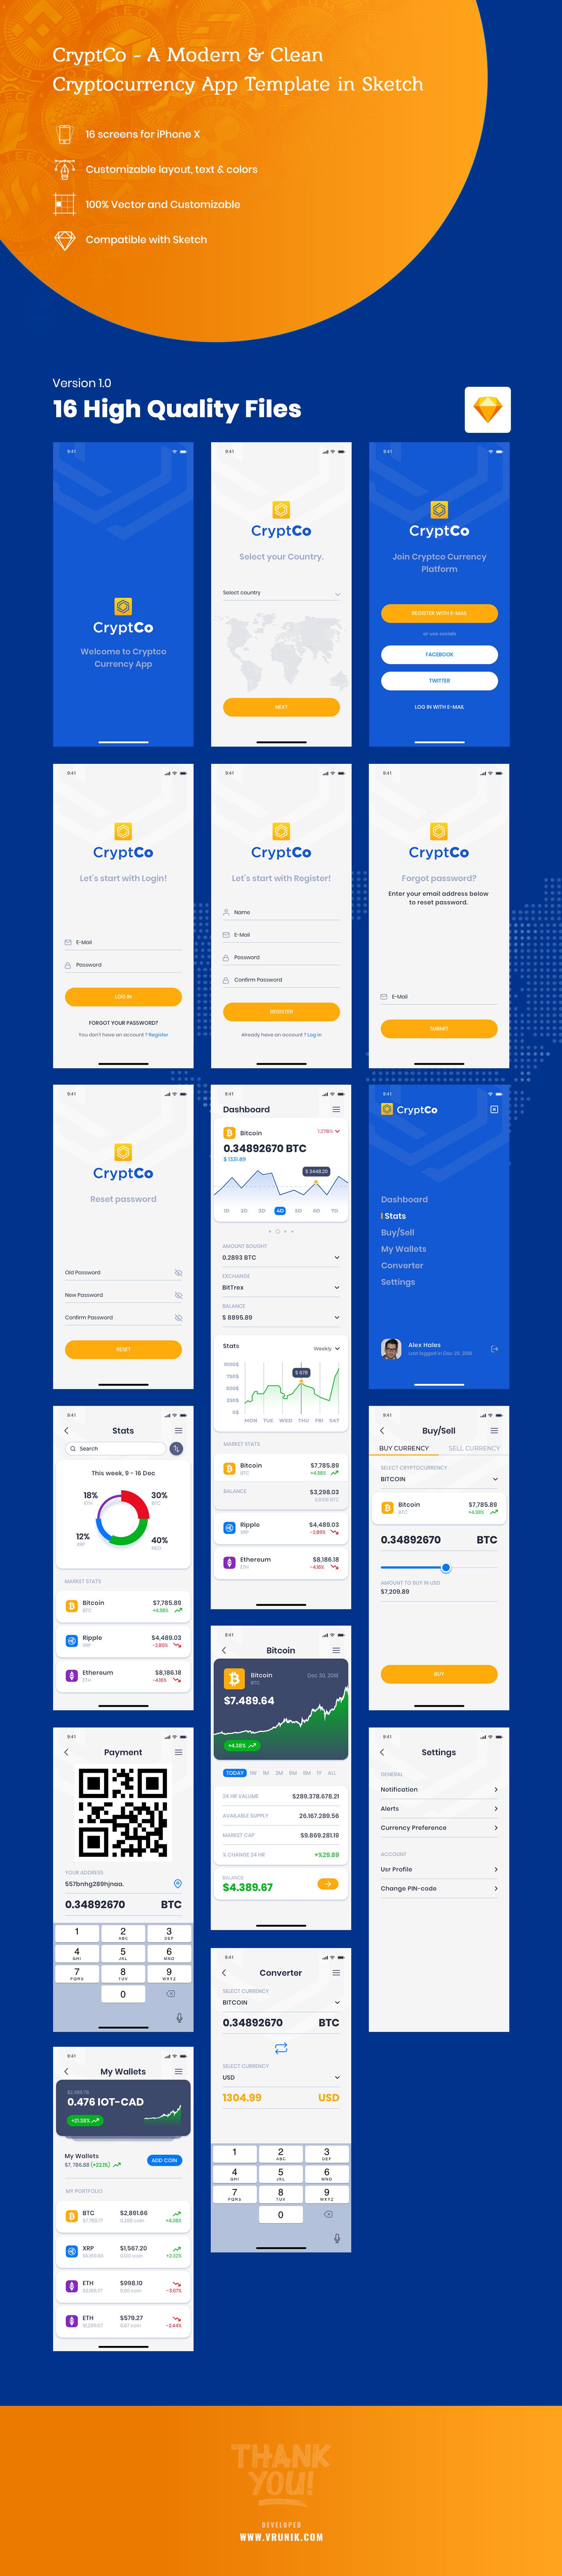 CryptCo - A Modern & Clean Cryptocurrency App Template in Sketch - 1